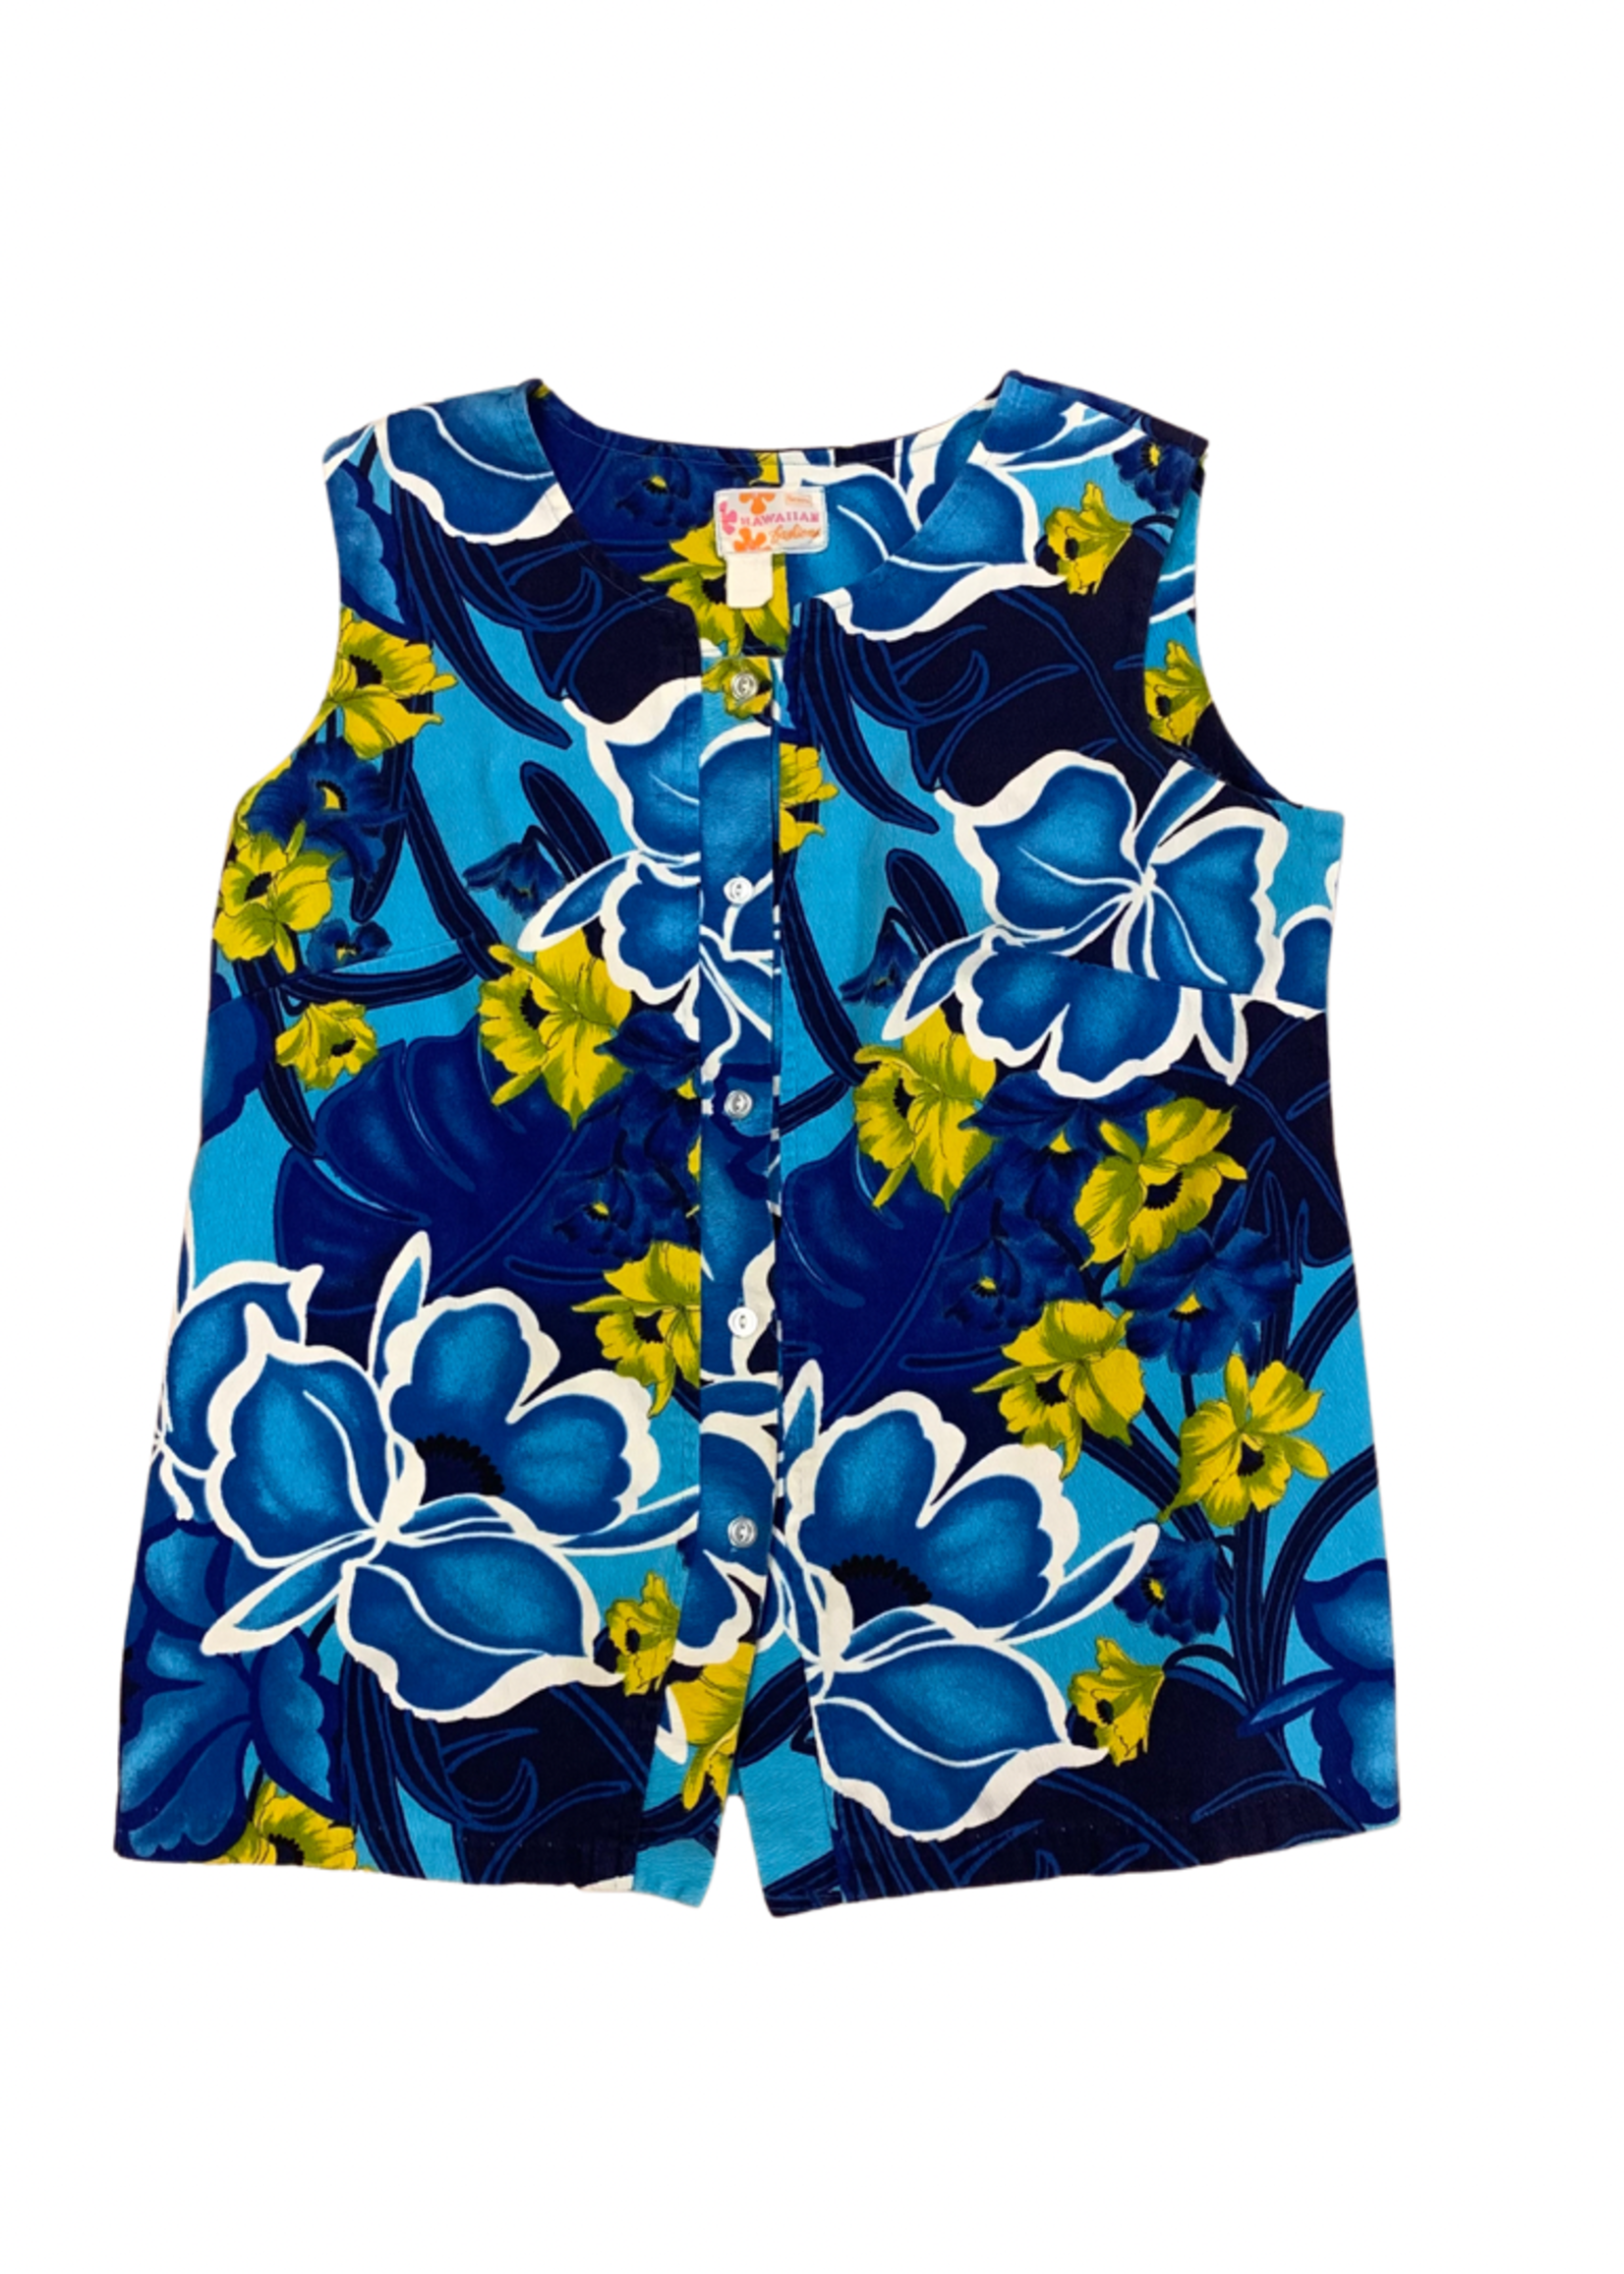 Mission Zero Women's Vintage Top - Barkcloth Sears - Blue and yellow orchid button down tank L